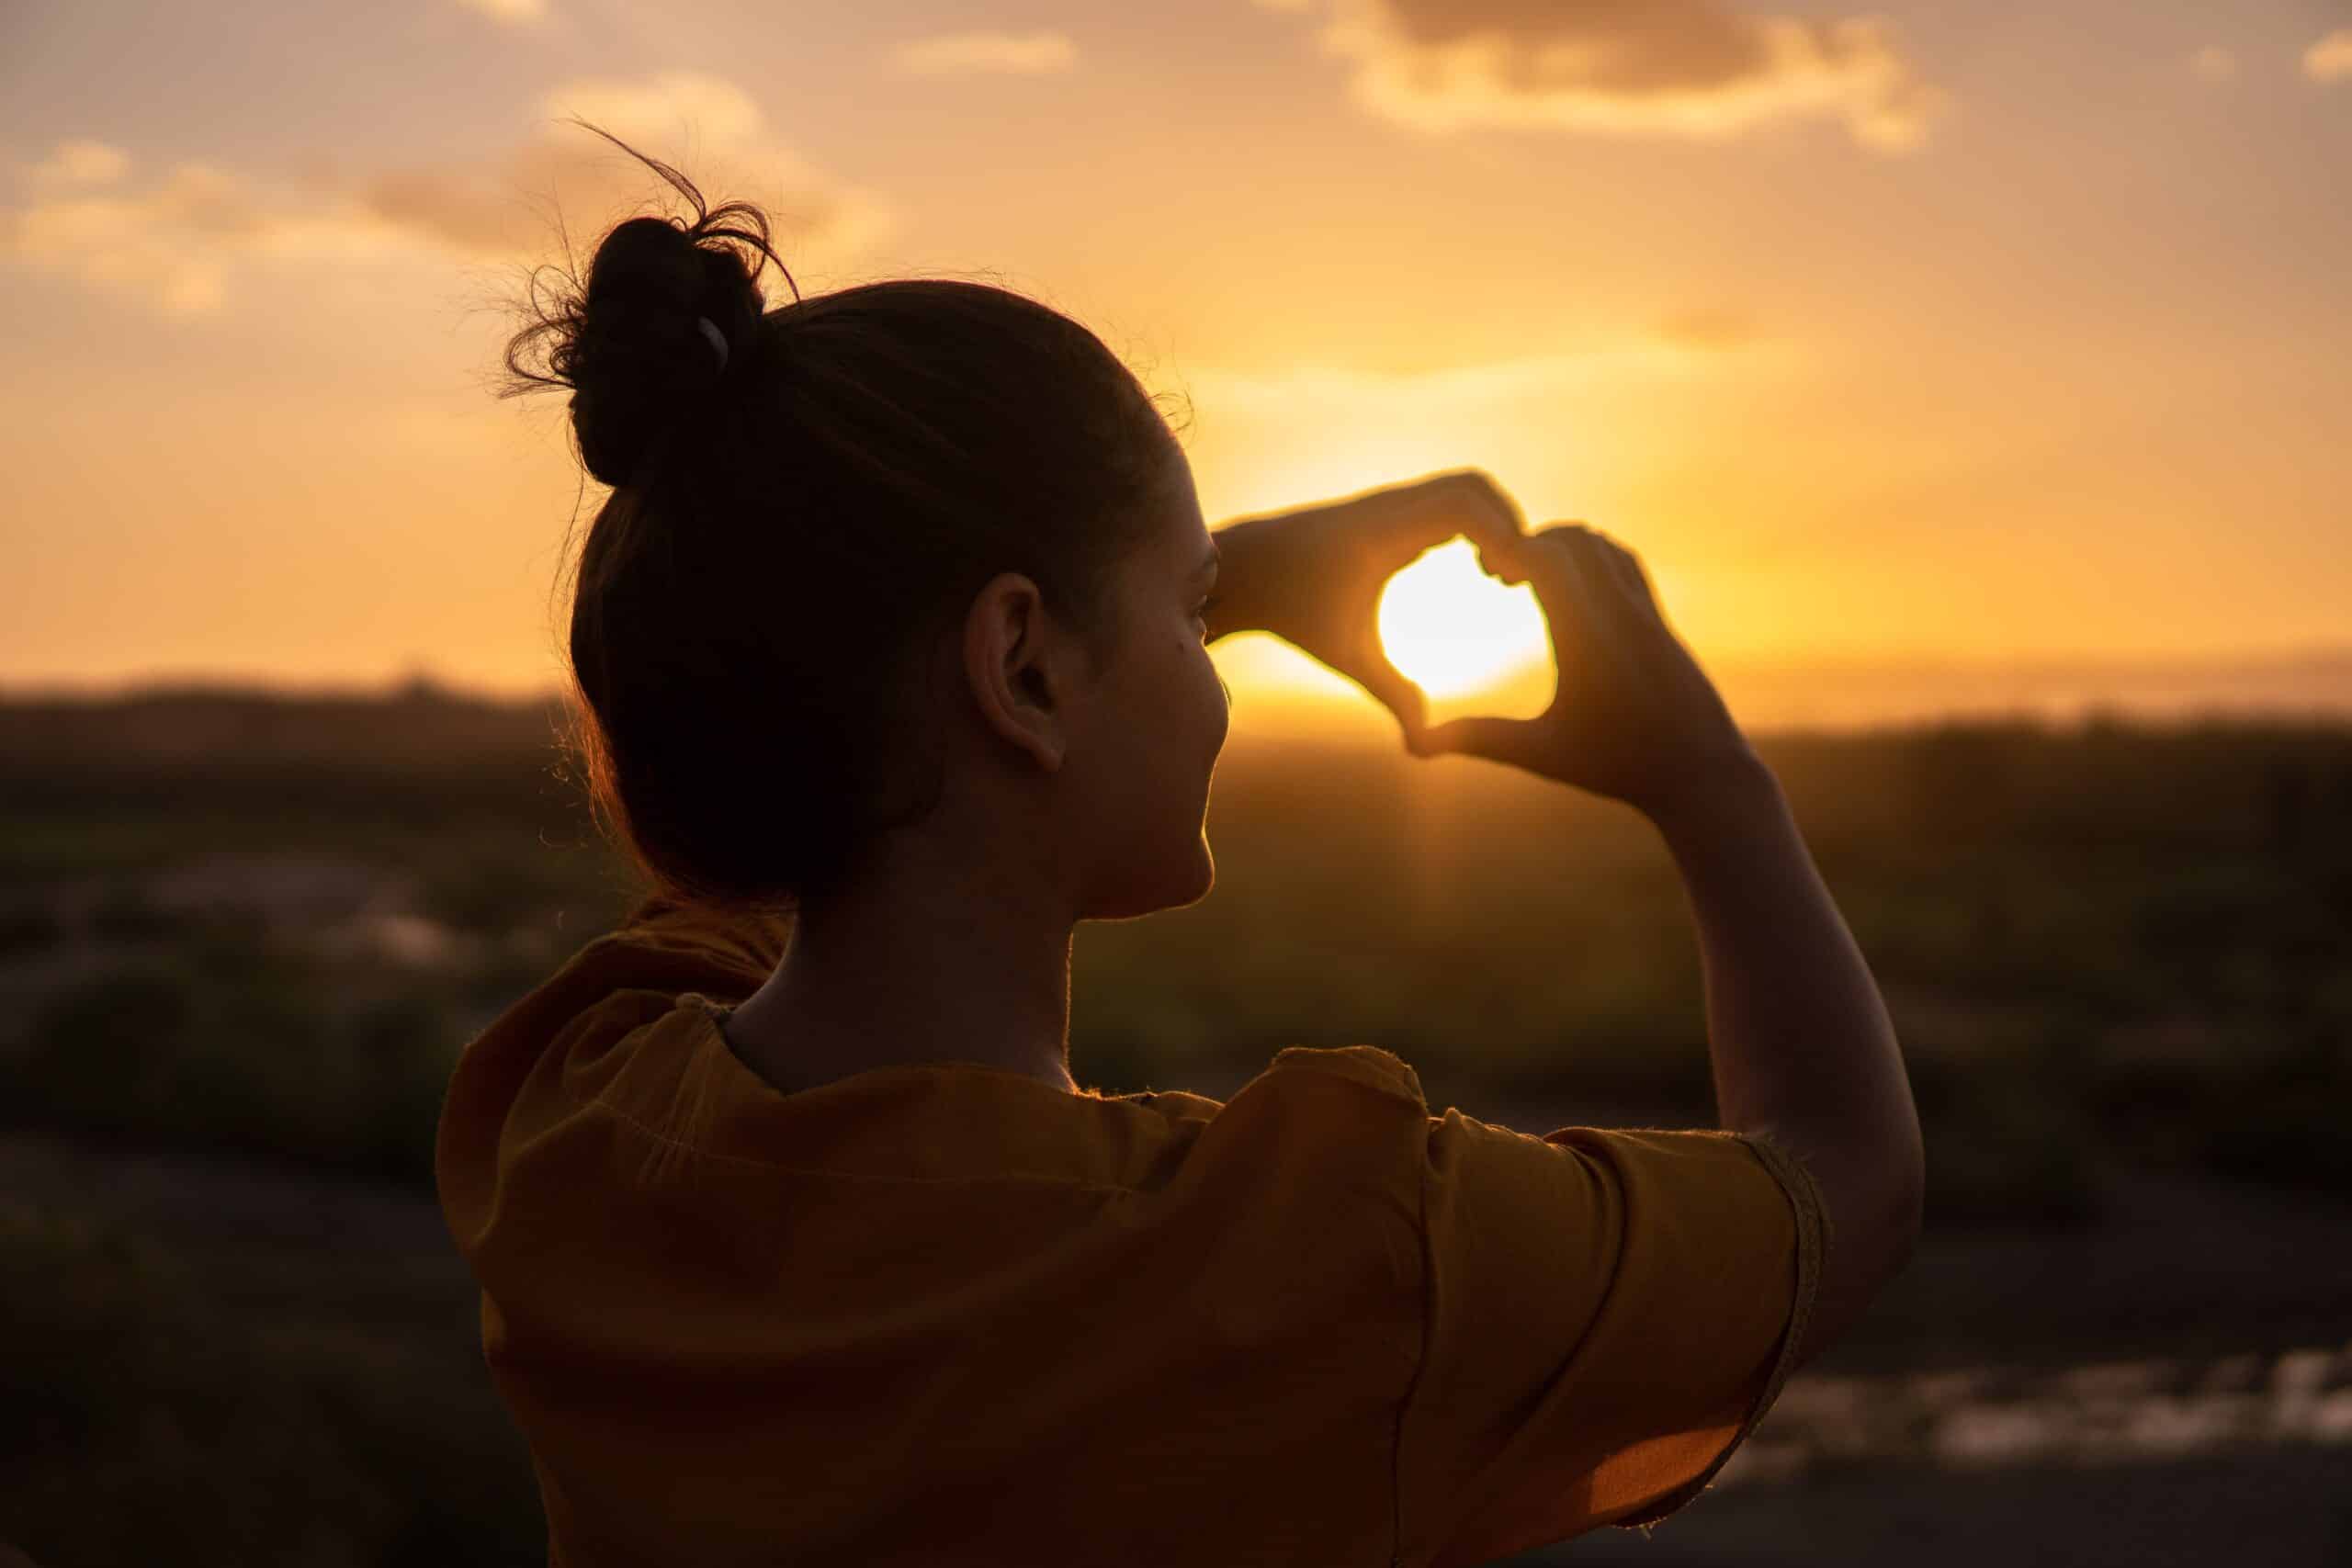 Silhouette of a woman creating a heart shape with her hands around the setting sun, against a warm sunset sky